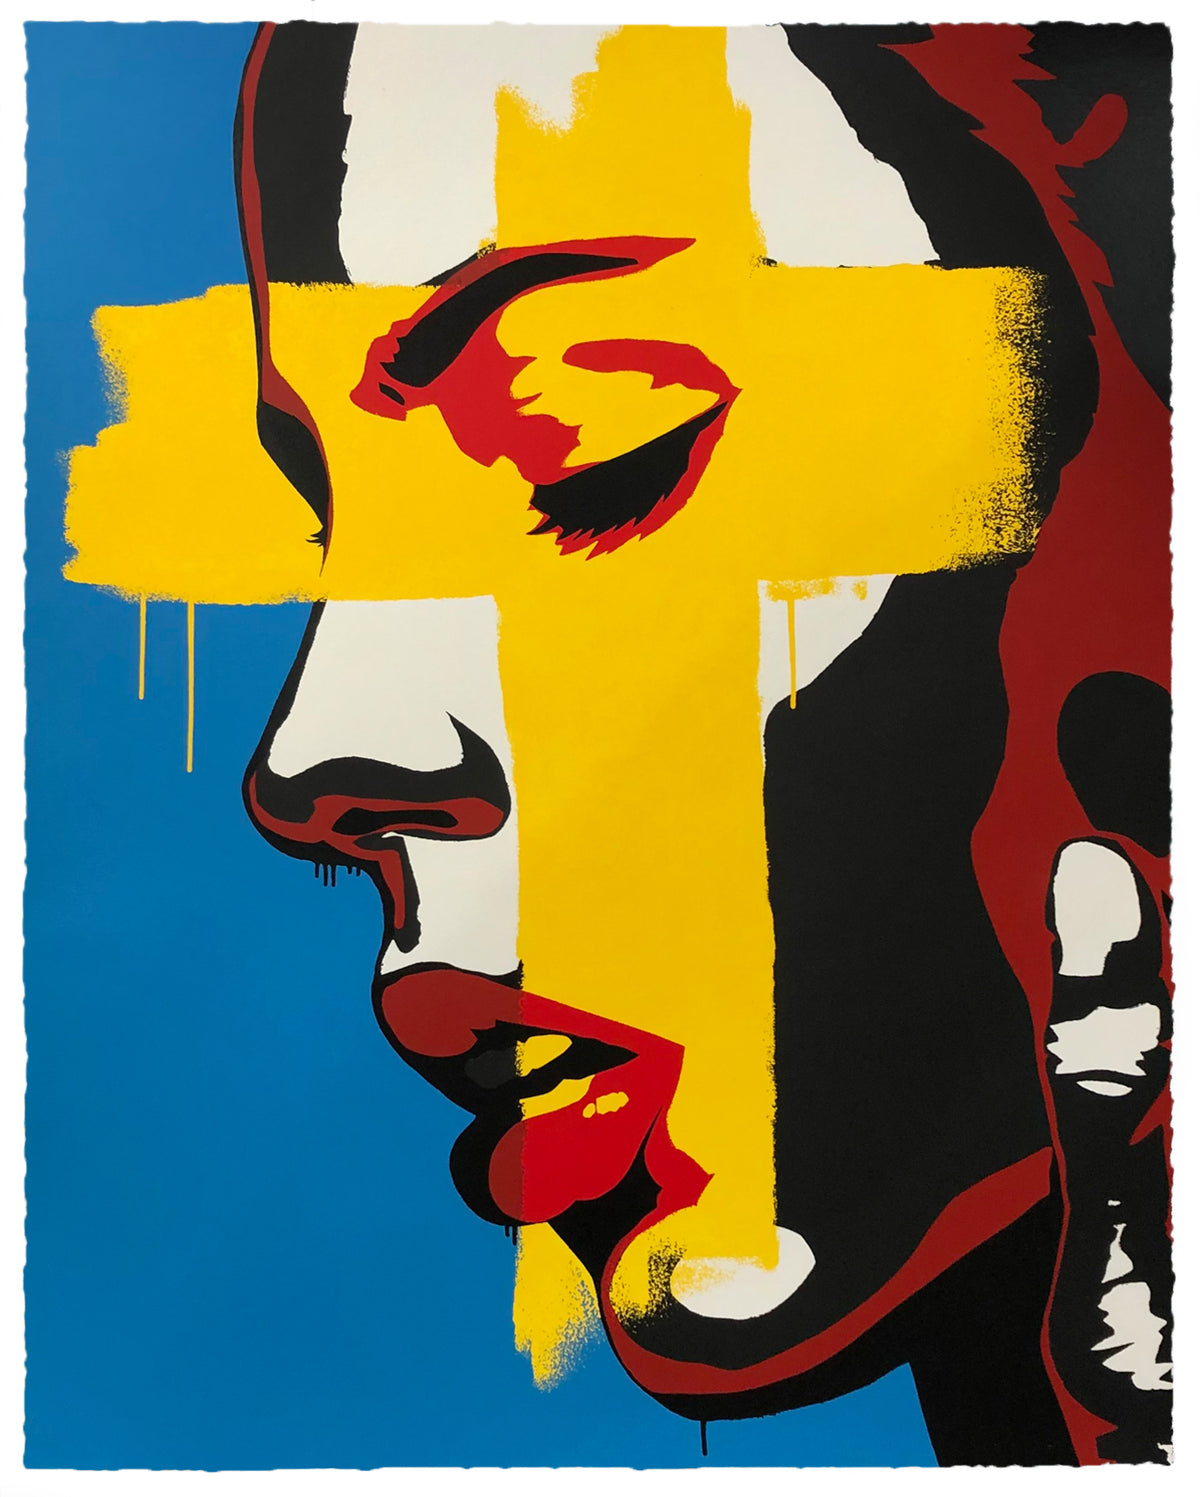 The profile of a woman, pop art style, with a yellow cross over her face 